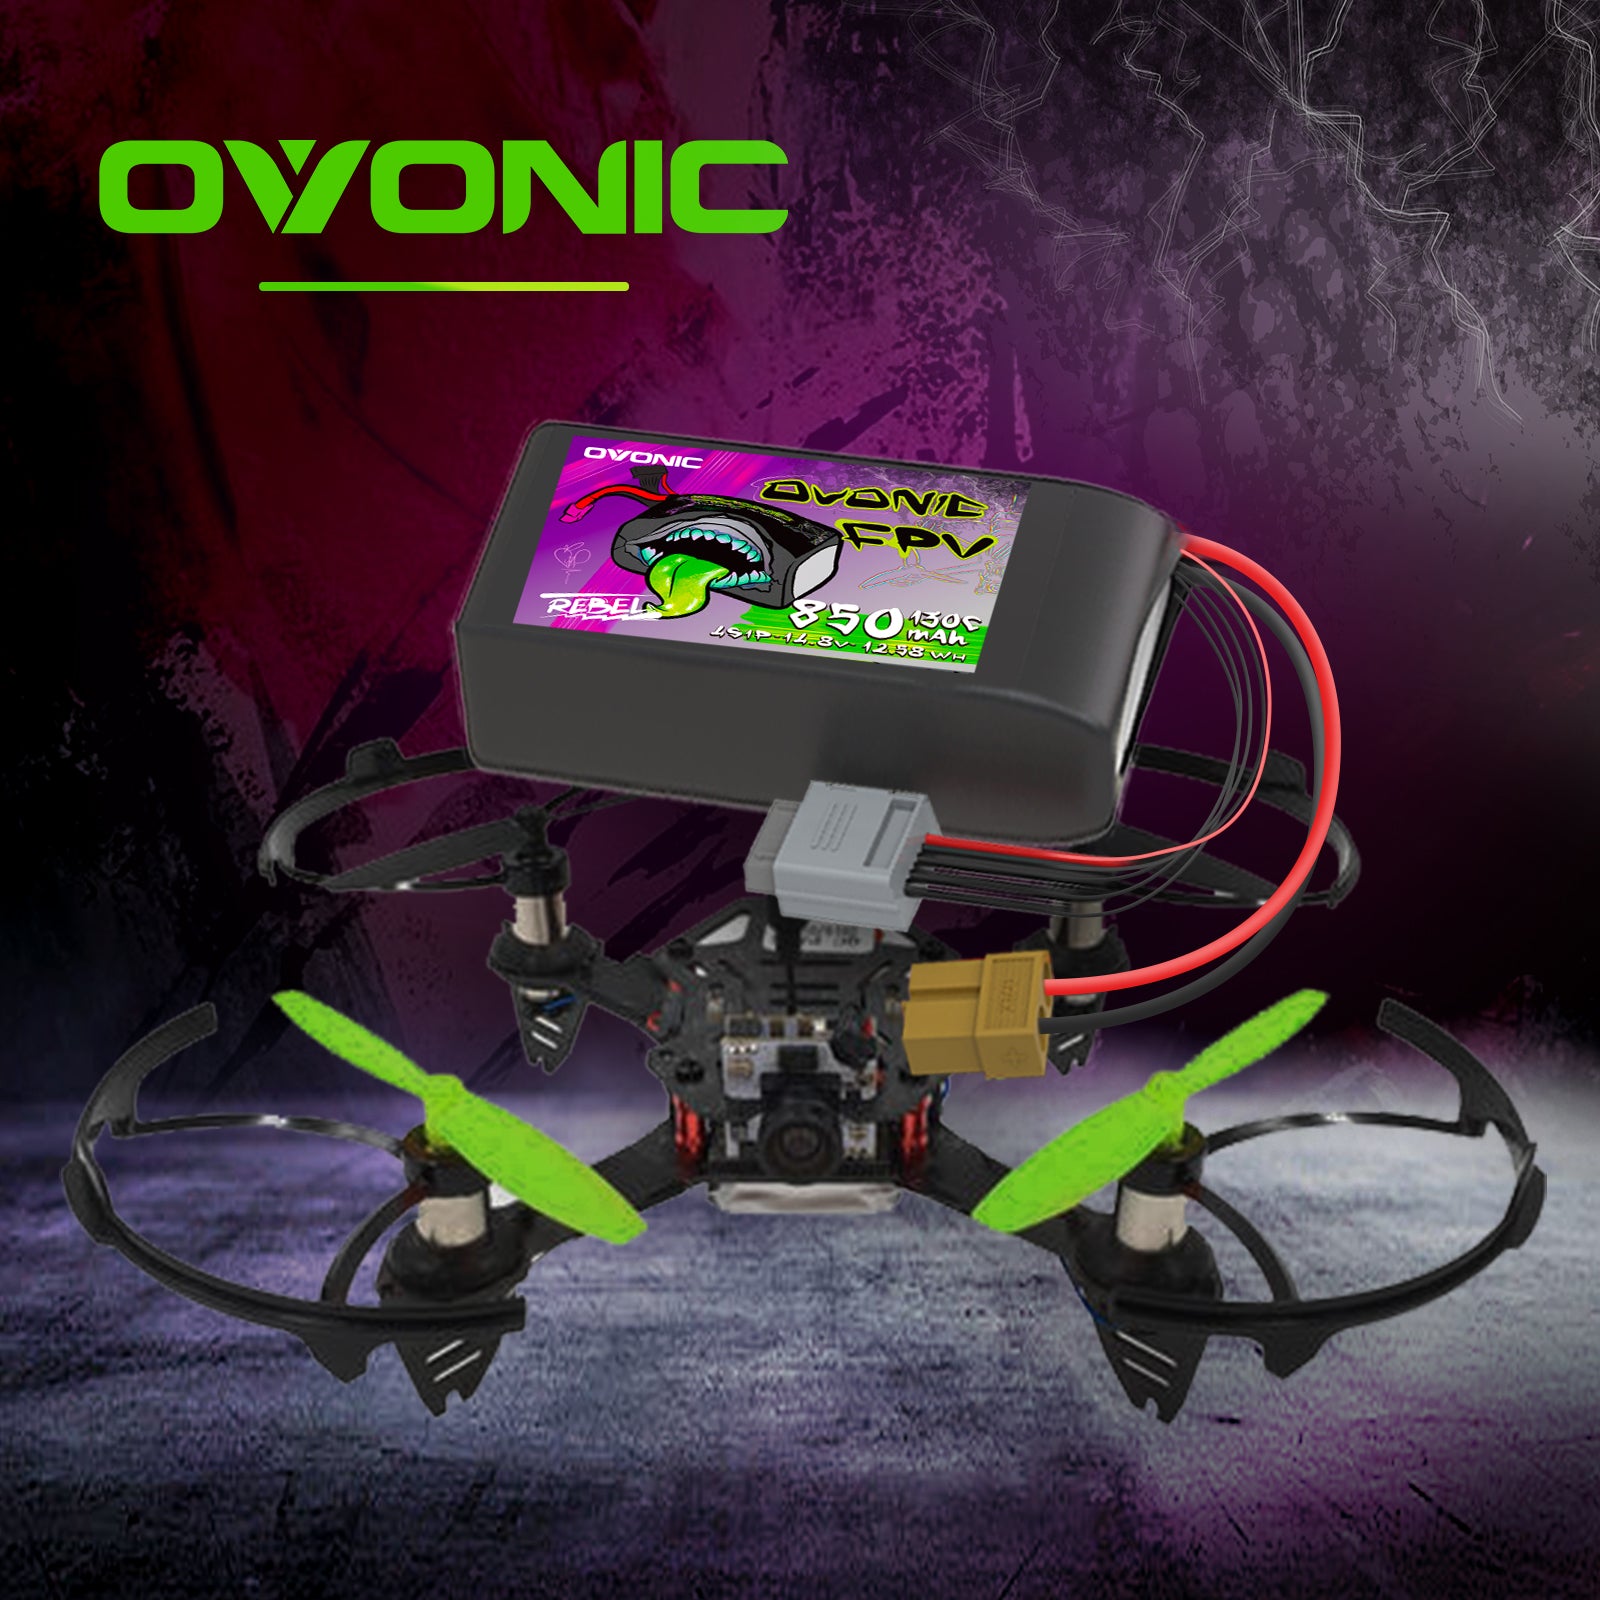 4 × Ovonic Rebel 2.0 130C 4S 850mah Lipo Battery 14.8V Pack with XT60 Plug for FPV Racing